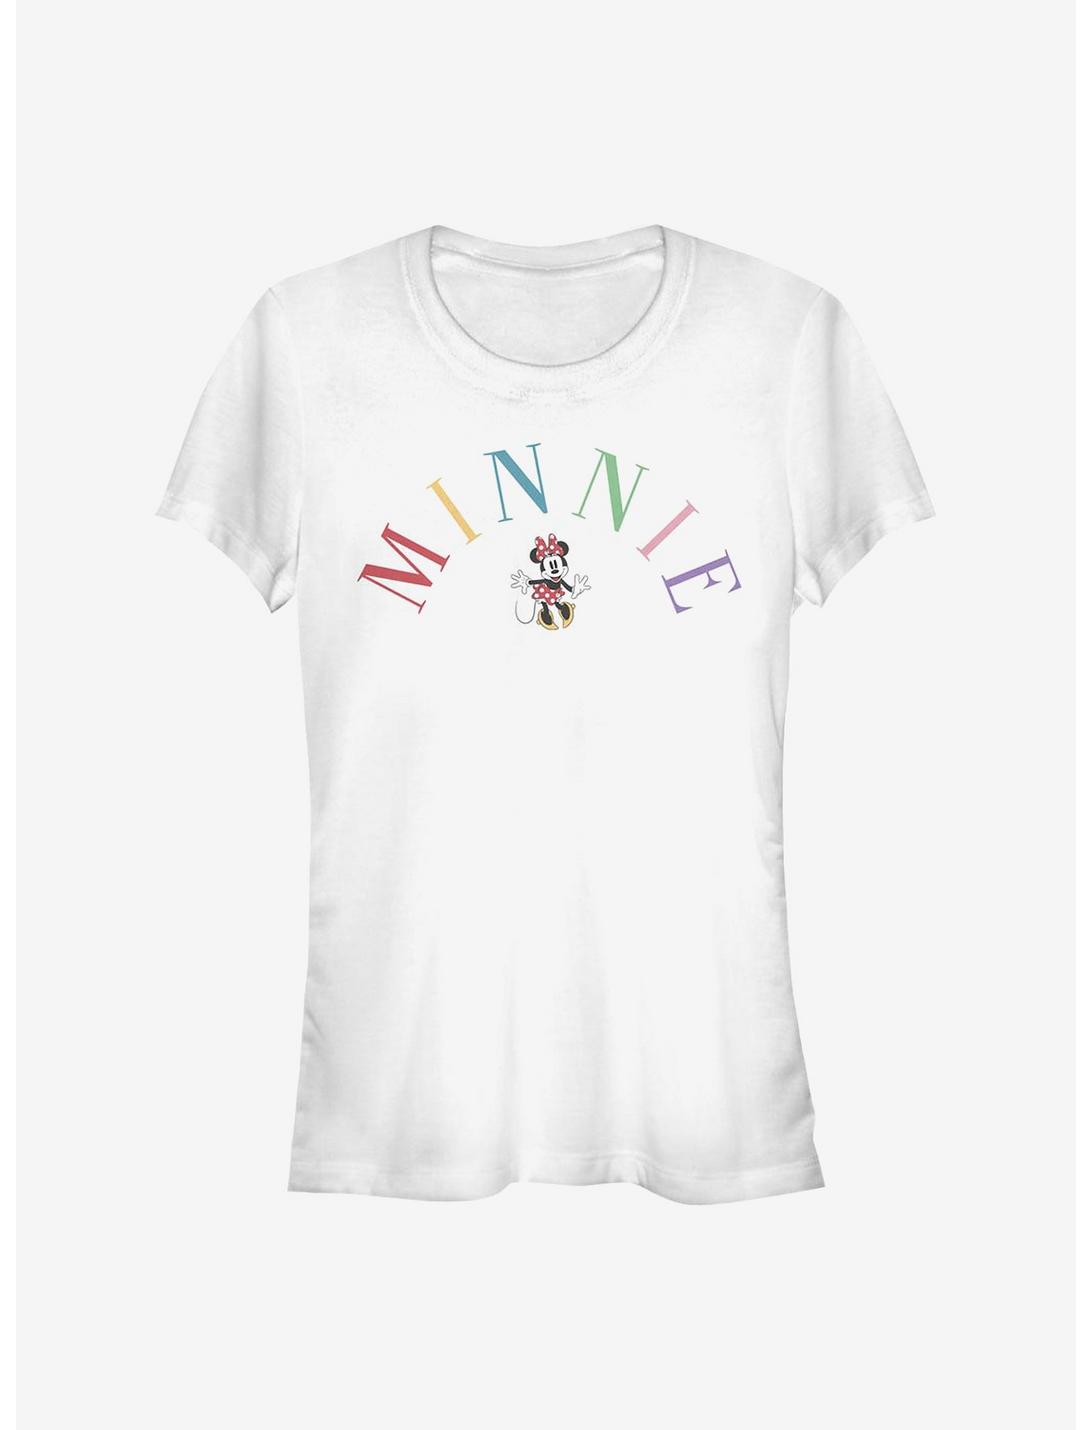 Disney Minnie Mouse Minnie Embroidery Girls T-Shirt, WHITE, hi-res